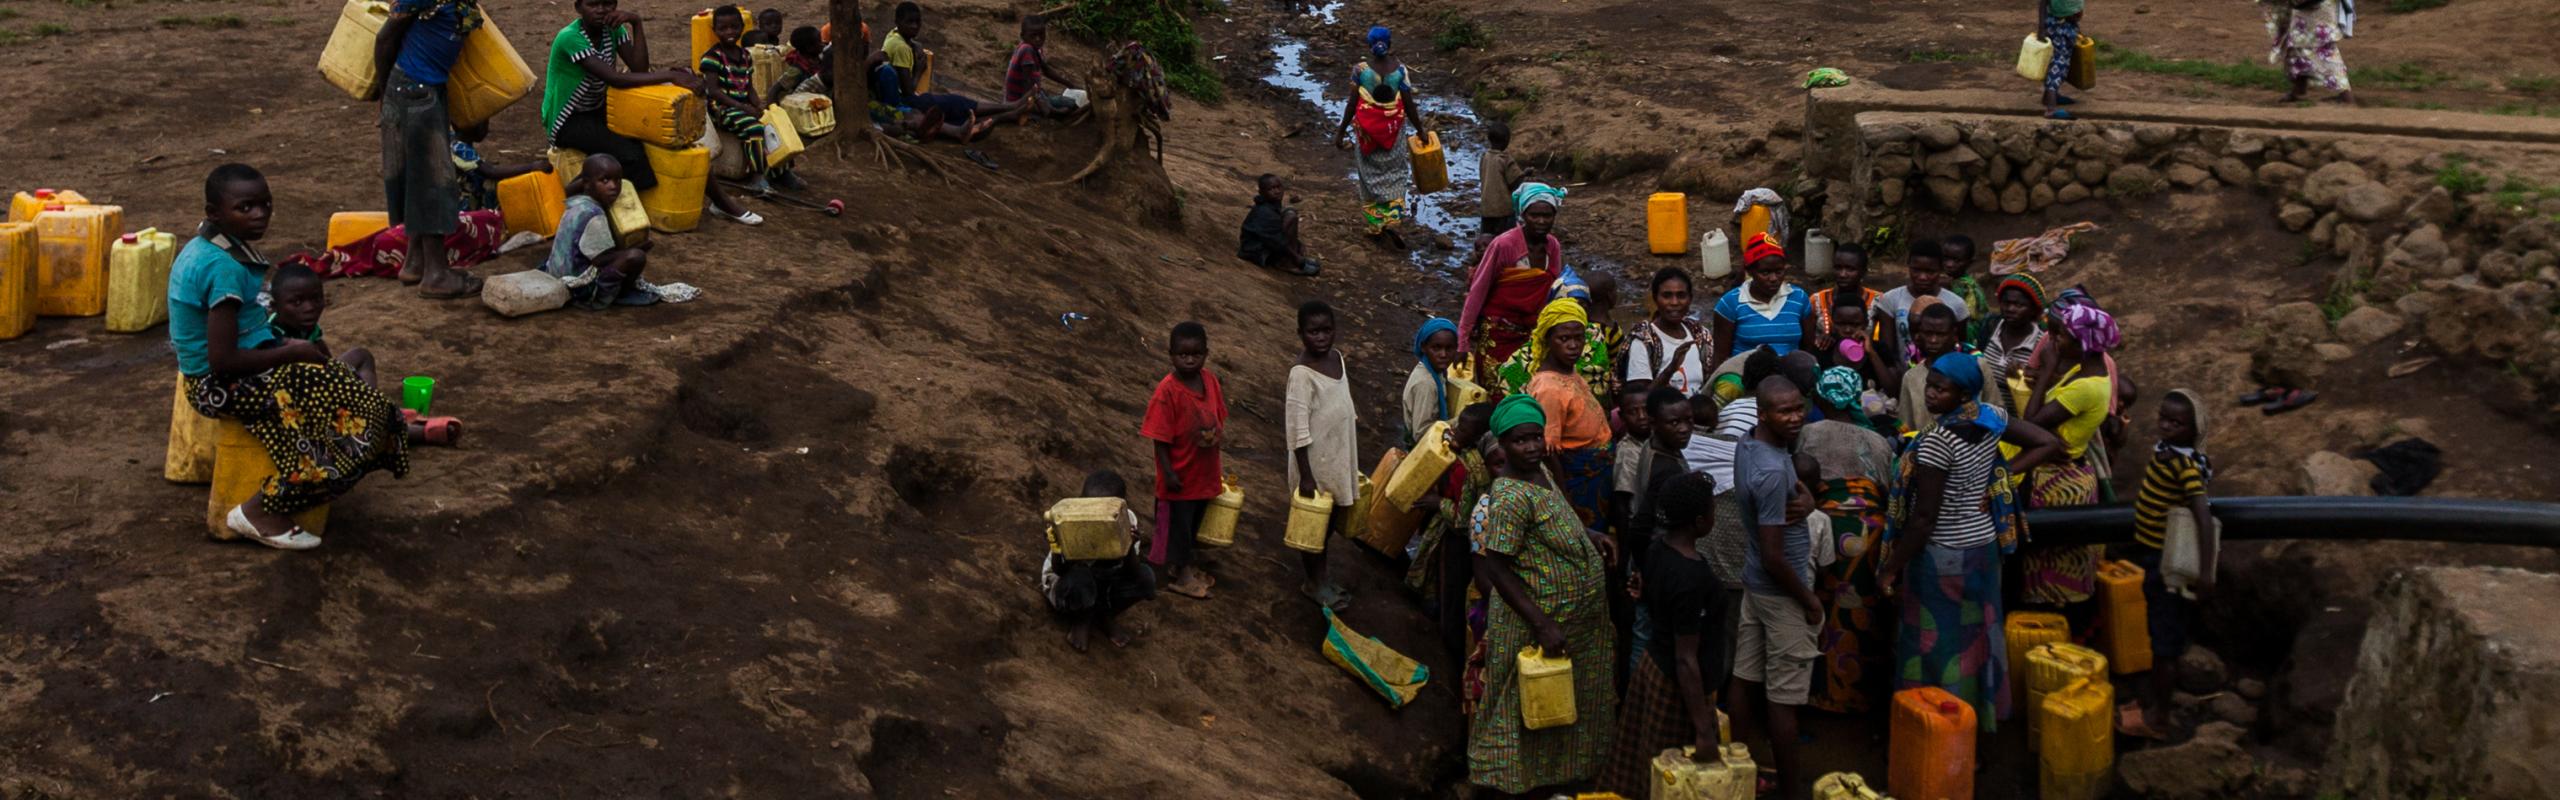 People in the queue waiting to get some water in eastern Congo